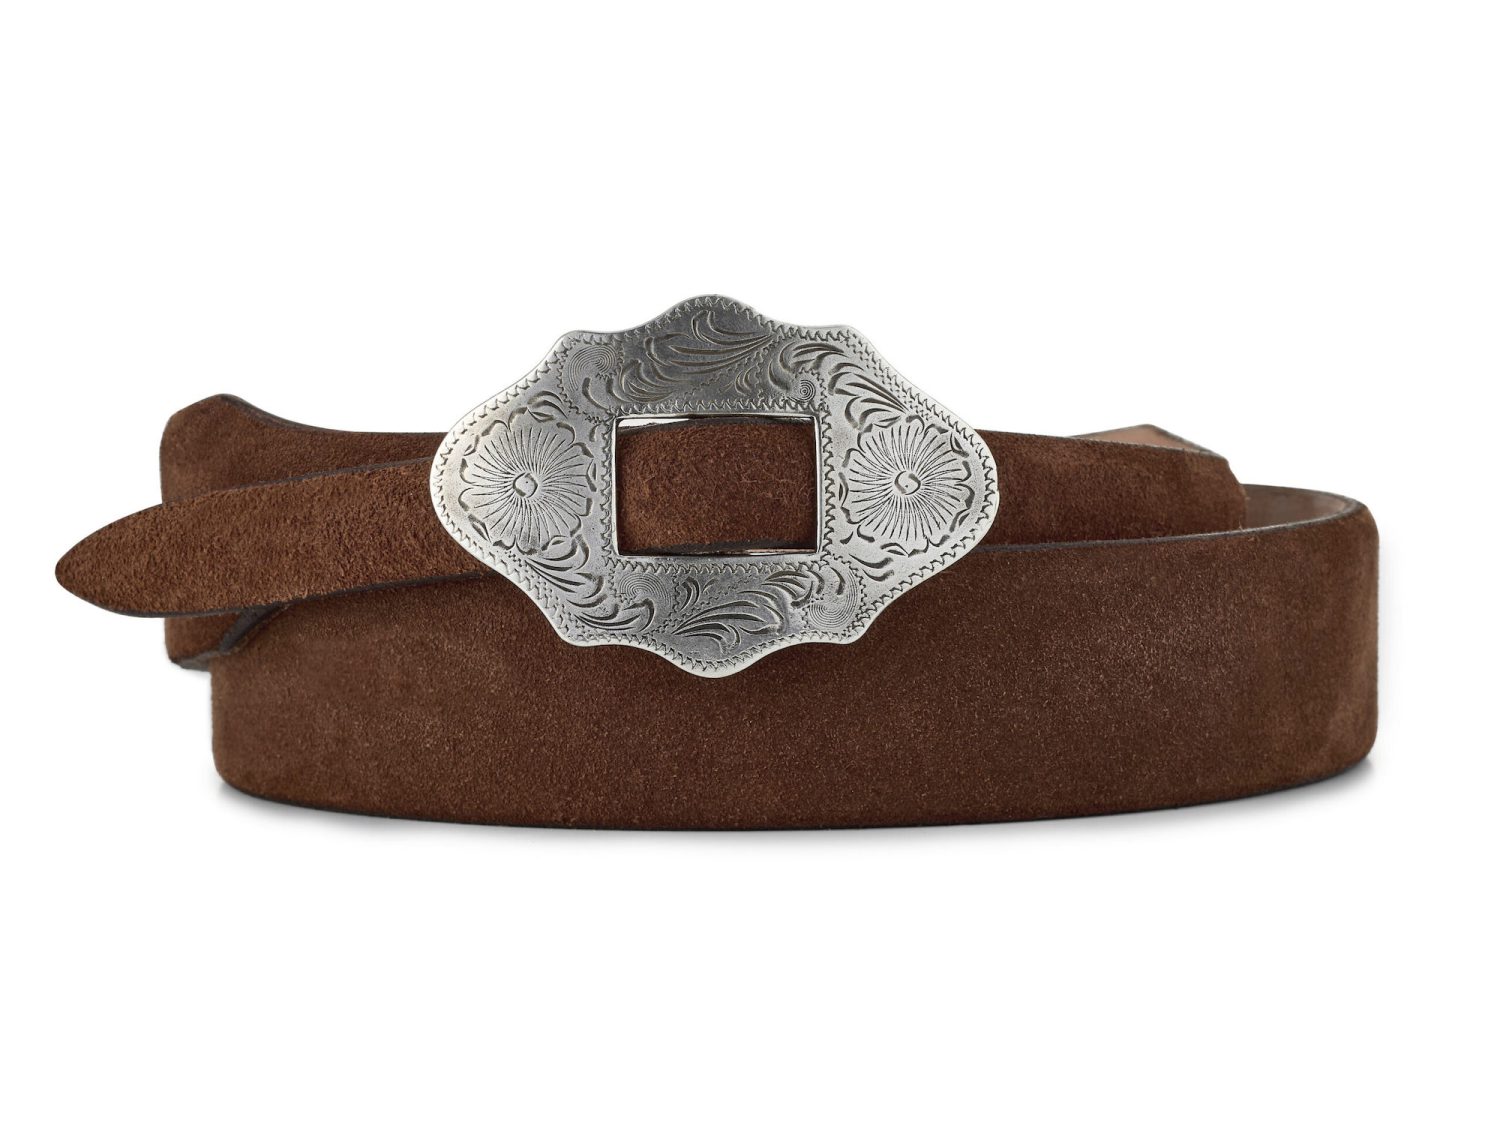 Brown premium suede new mexico belt with silver buckle, rolled